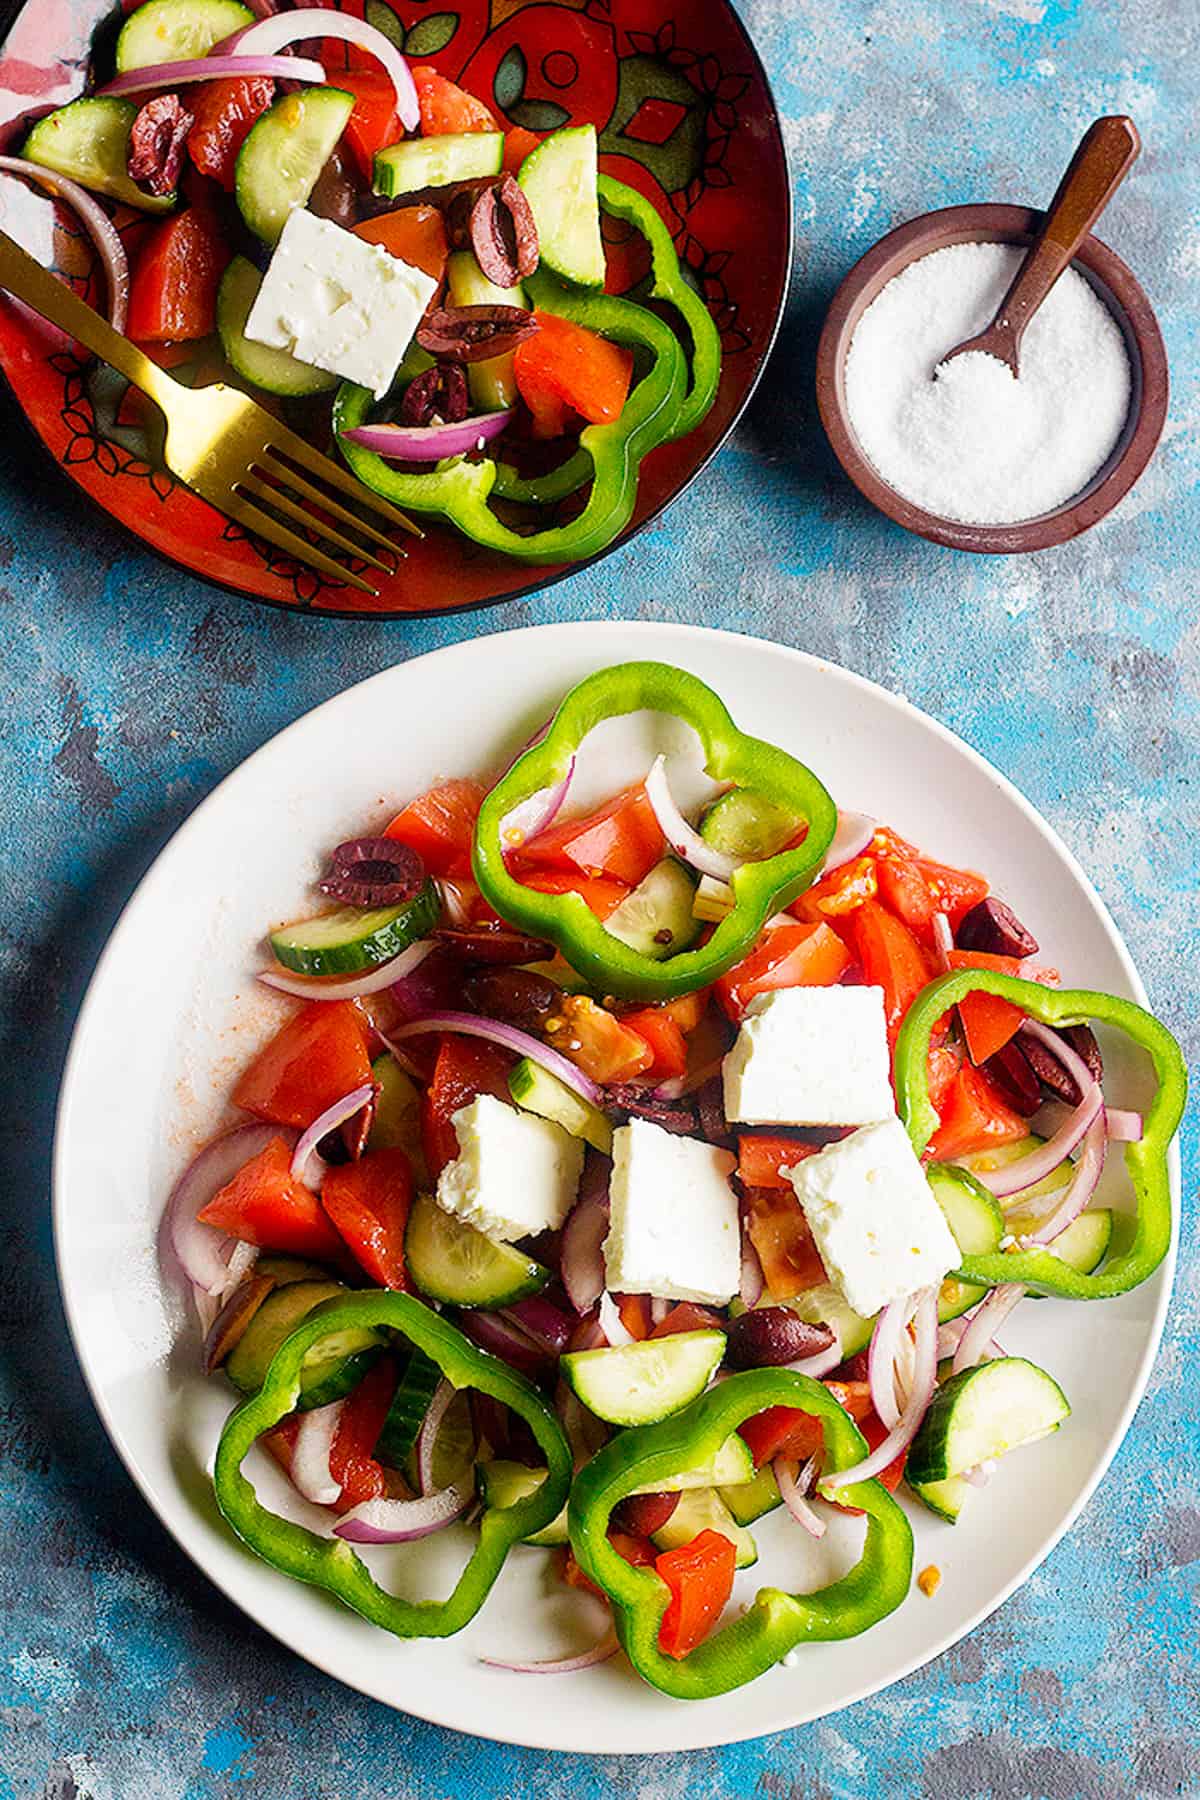 Learn how to make traditional Greek salad recipe with only a few ingredients. This easy and simple summer salad comes together in no time!